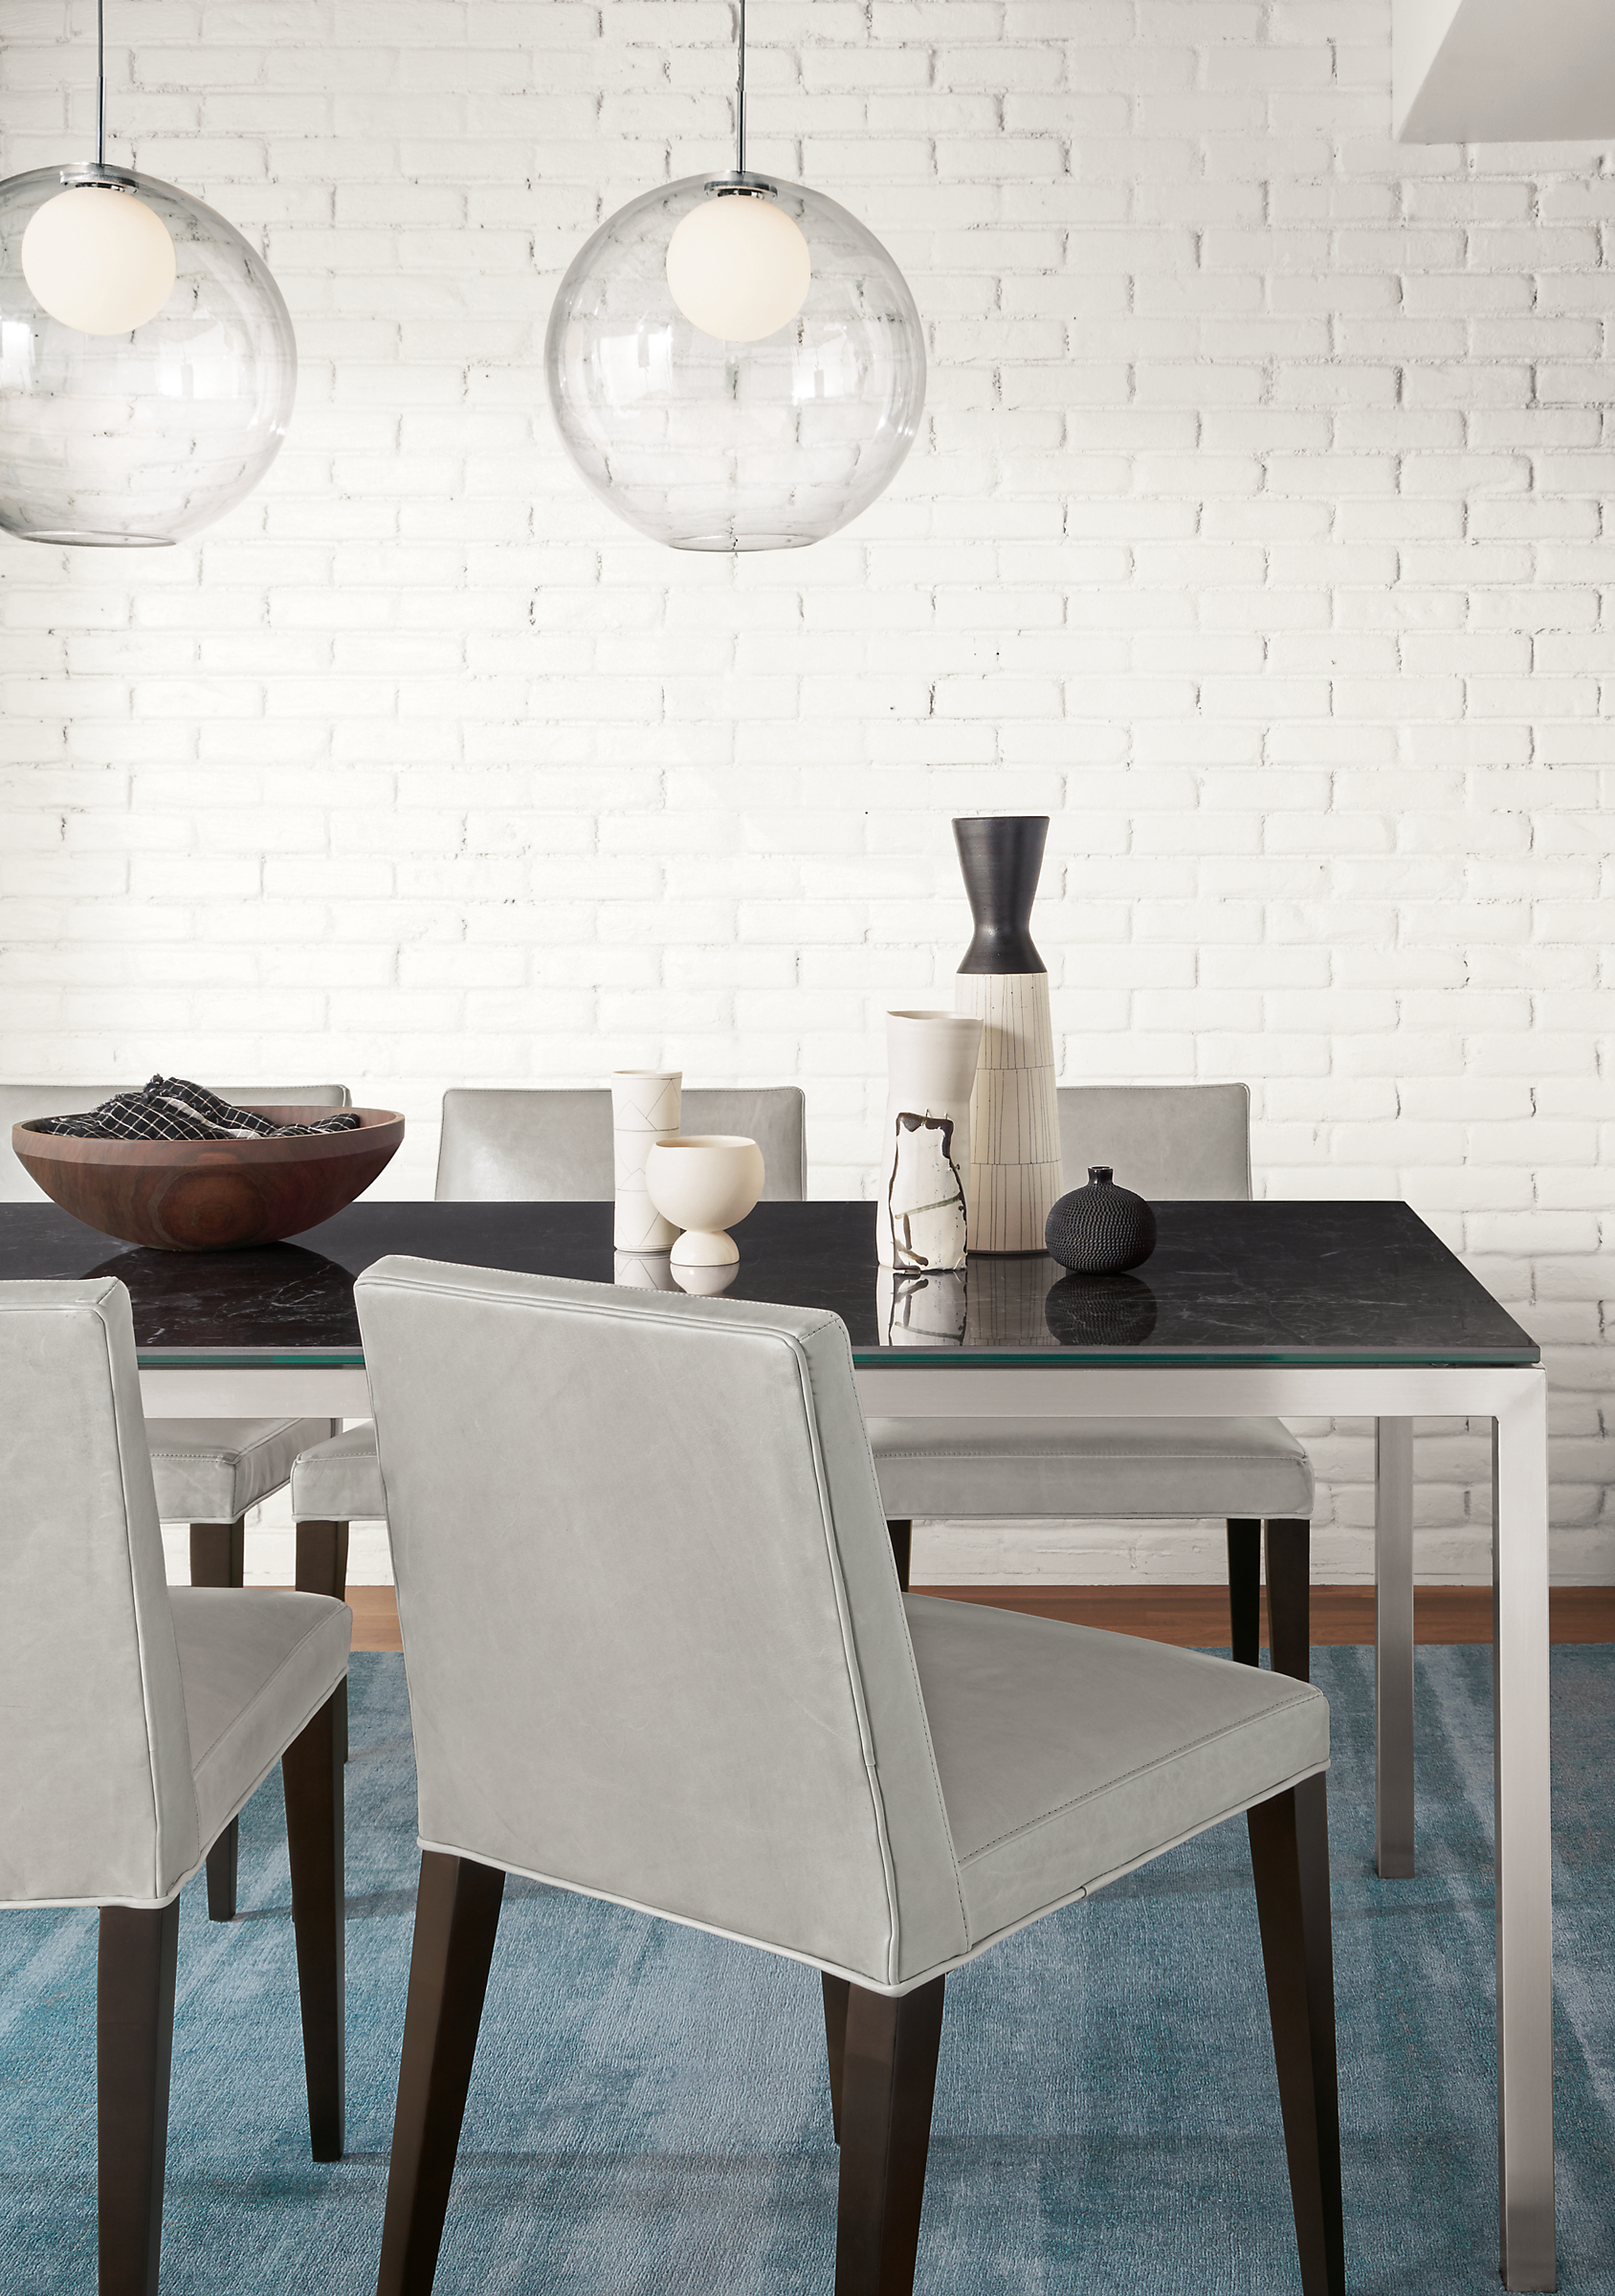 Detail of Ava side chair in Vento Grey leather at dining table.